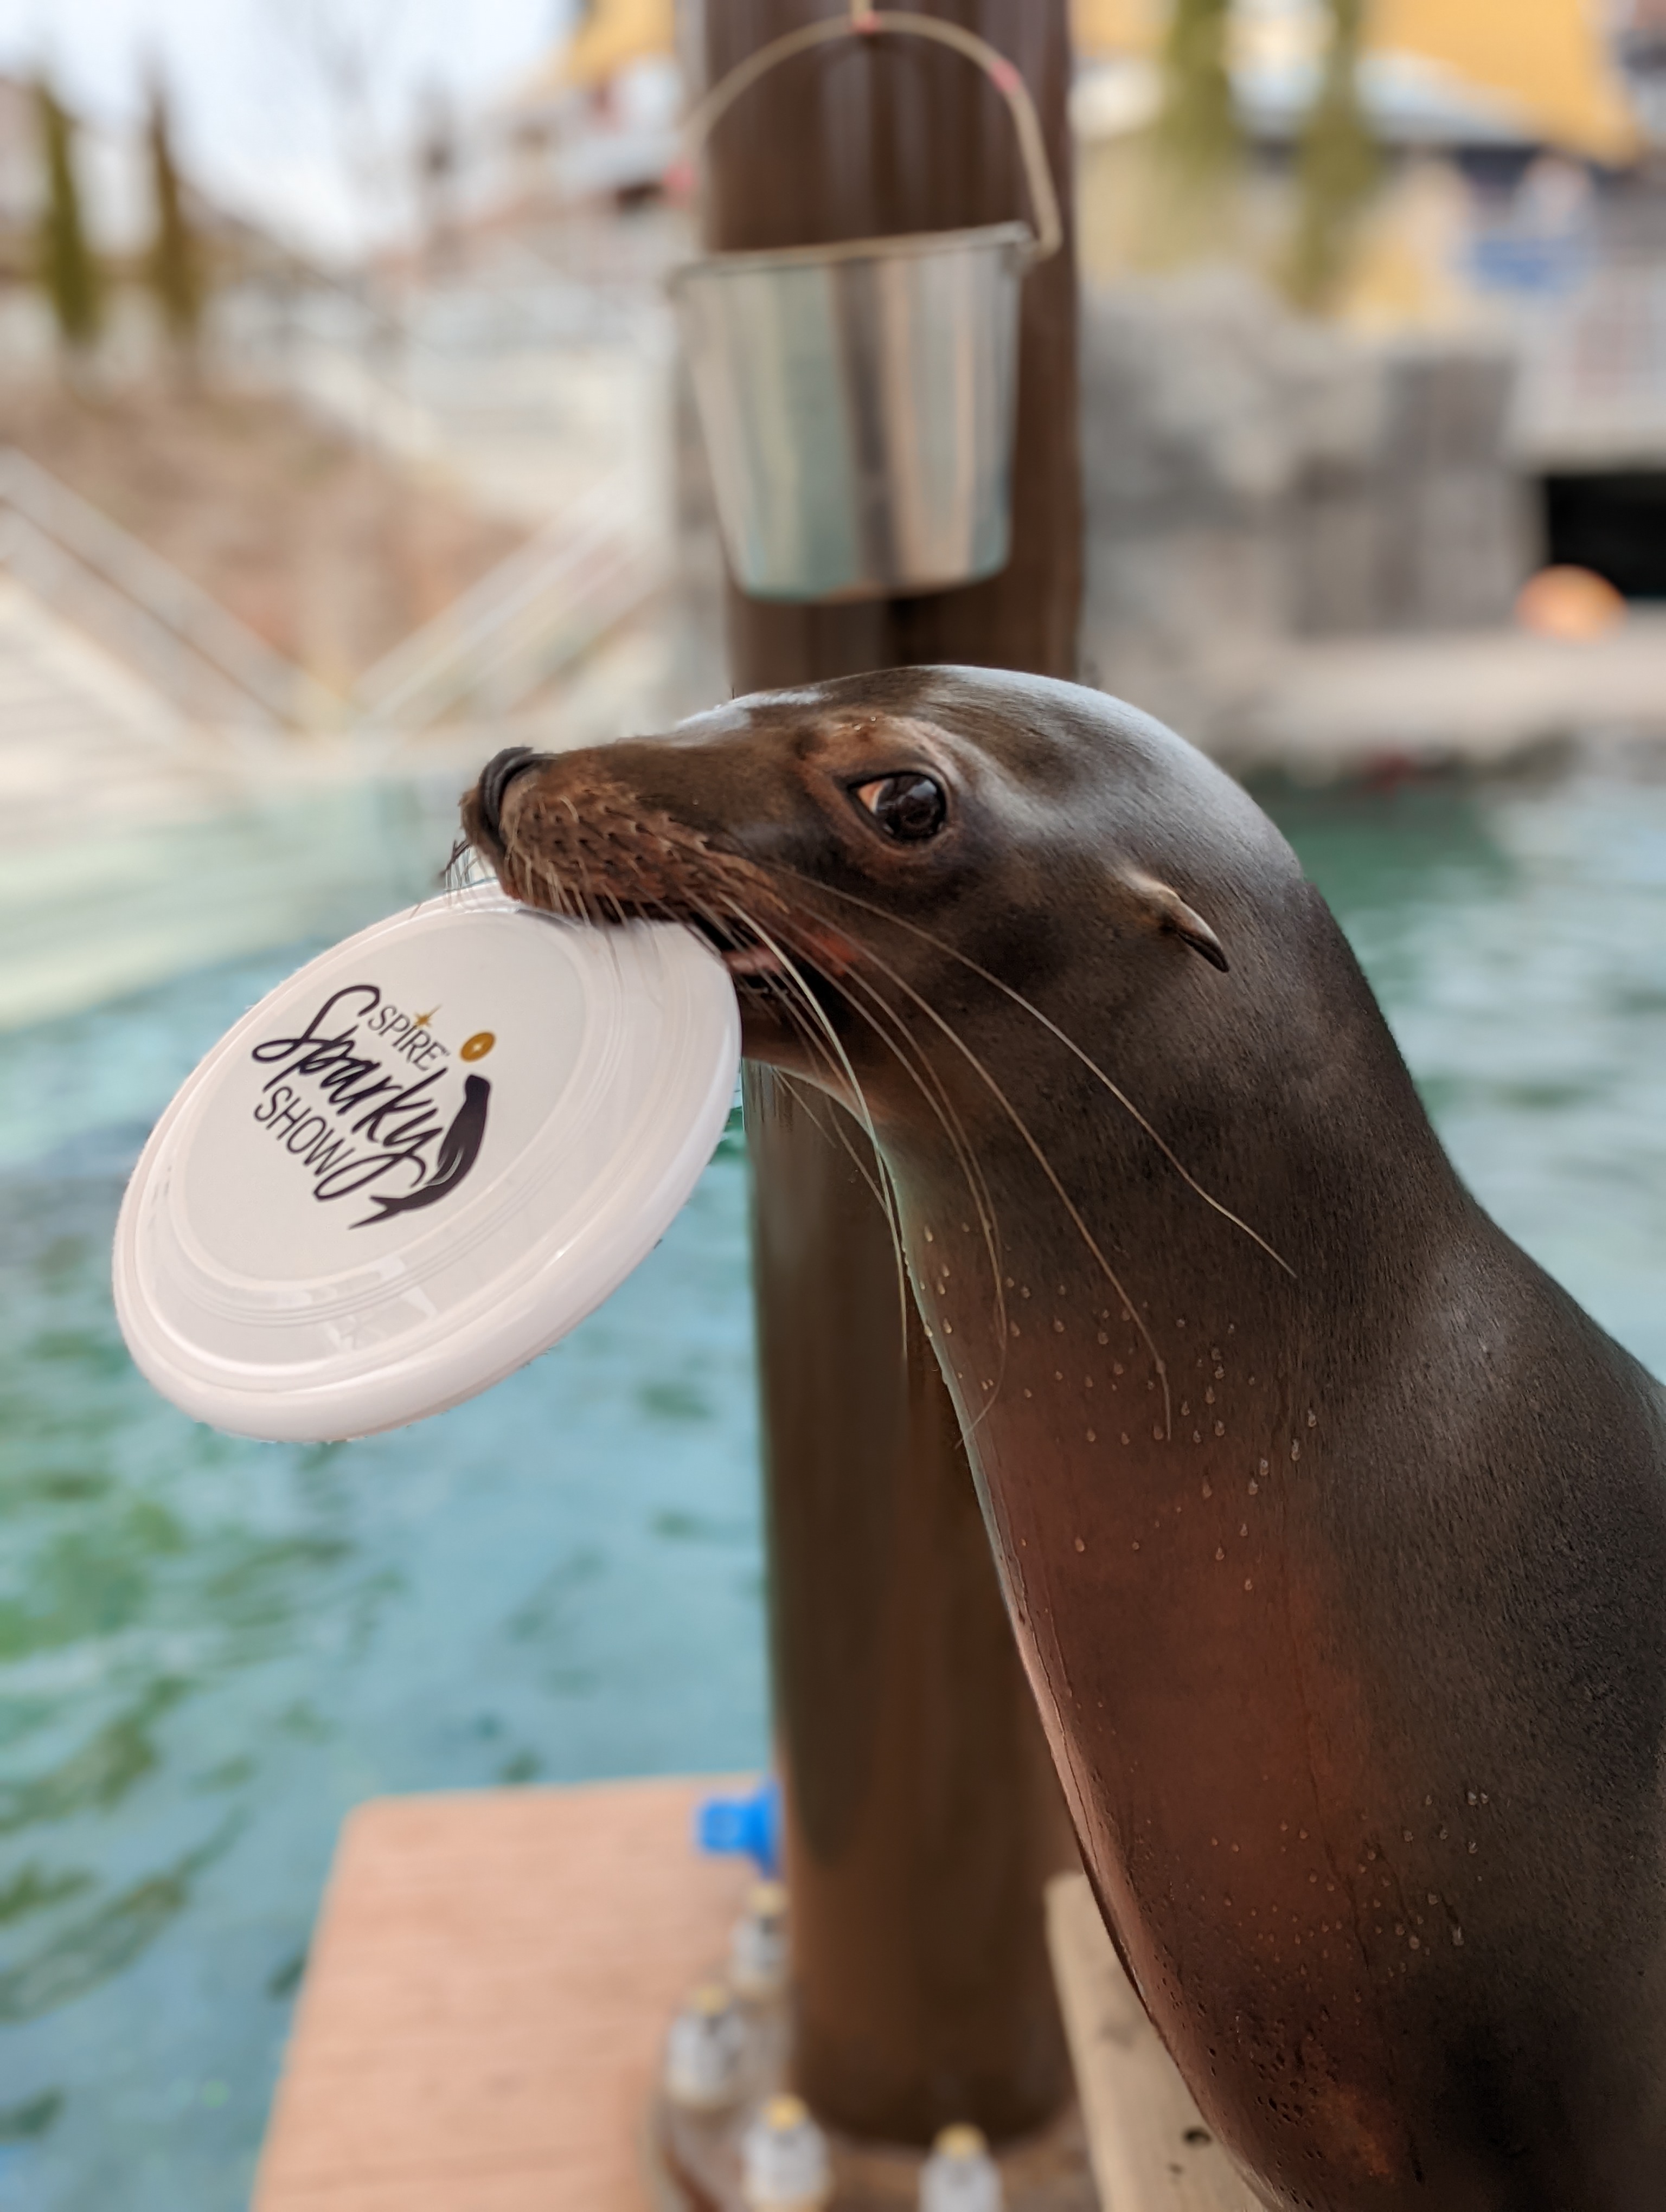 sea lion holding a frisbee, looking into camera